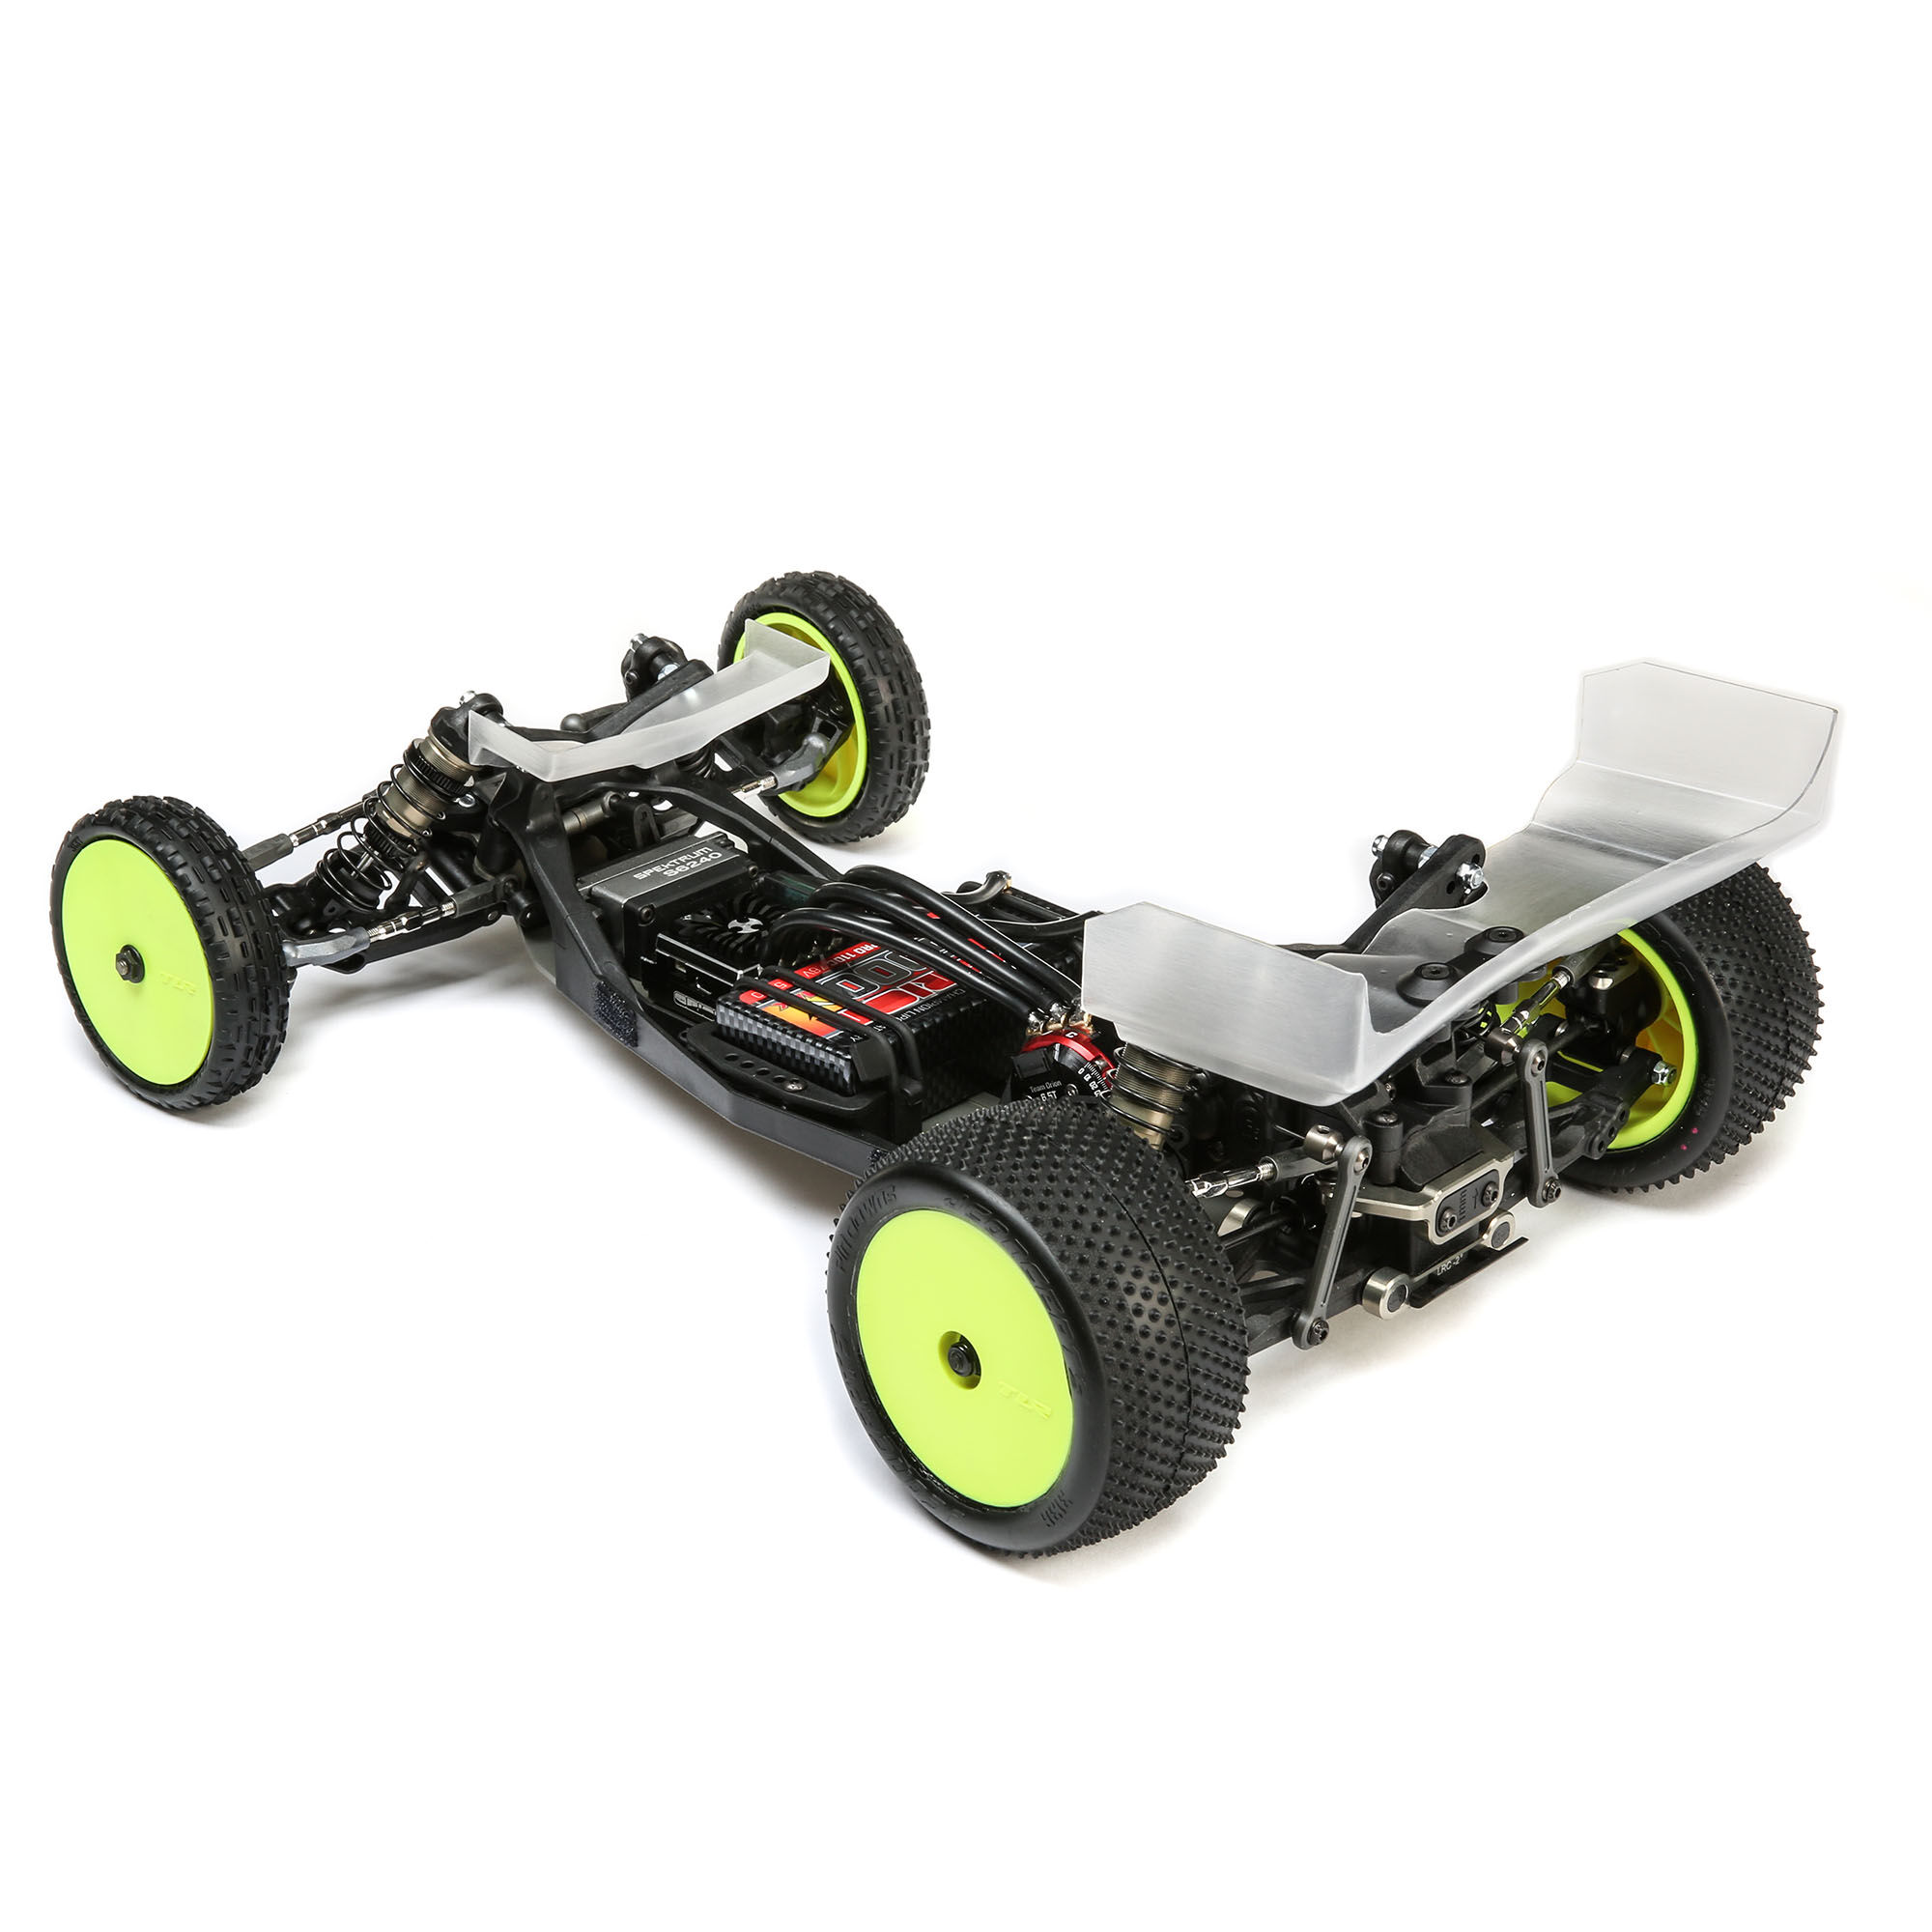 Team Losi Racing 1/10 22 5.0 2WD RC Buggy AC Race Kit Astro/Carpet TLR03017 HH